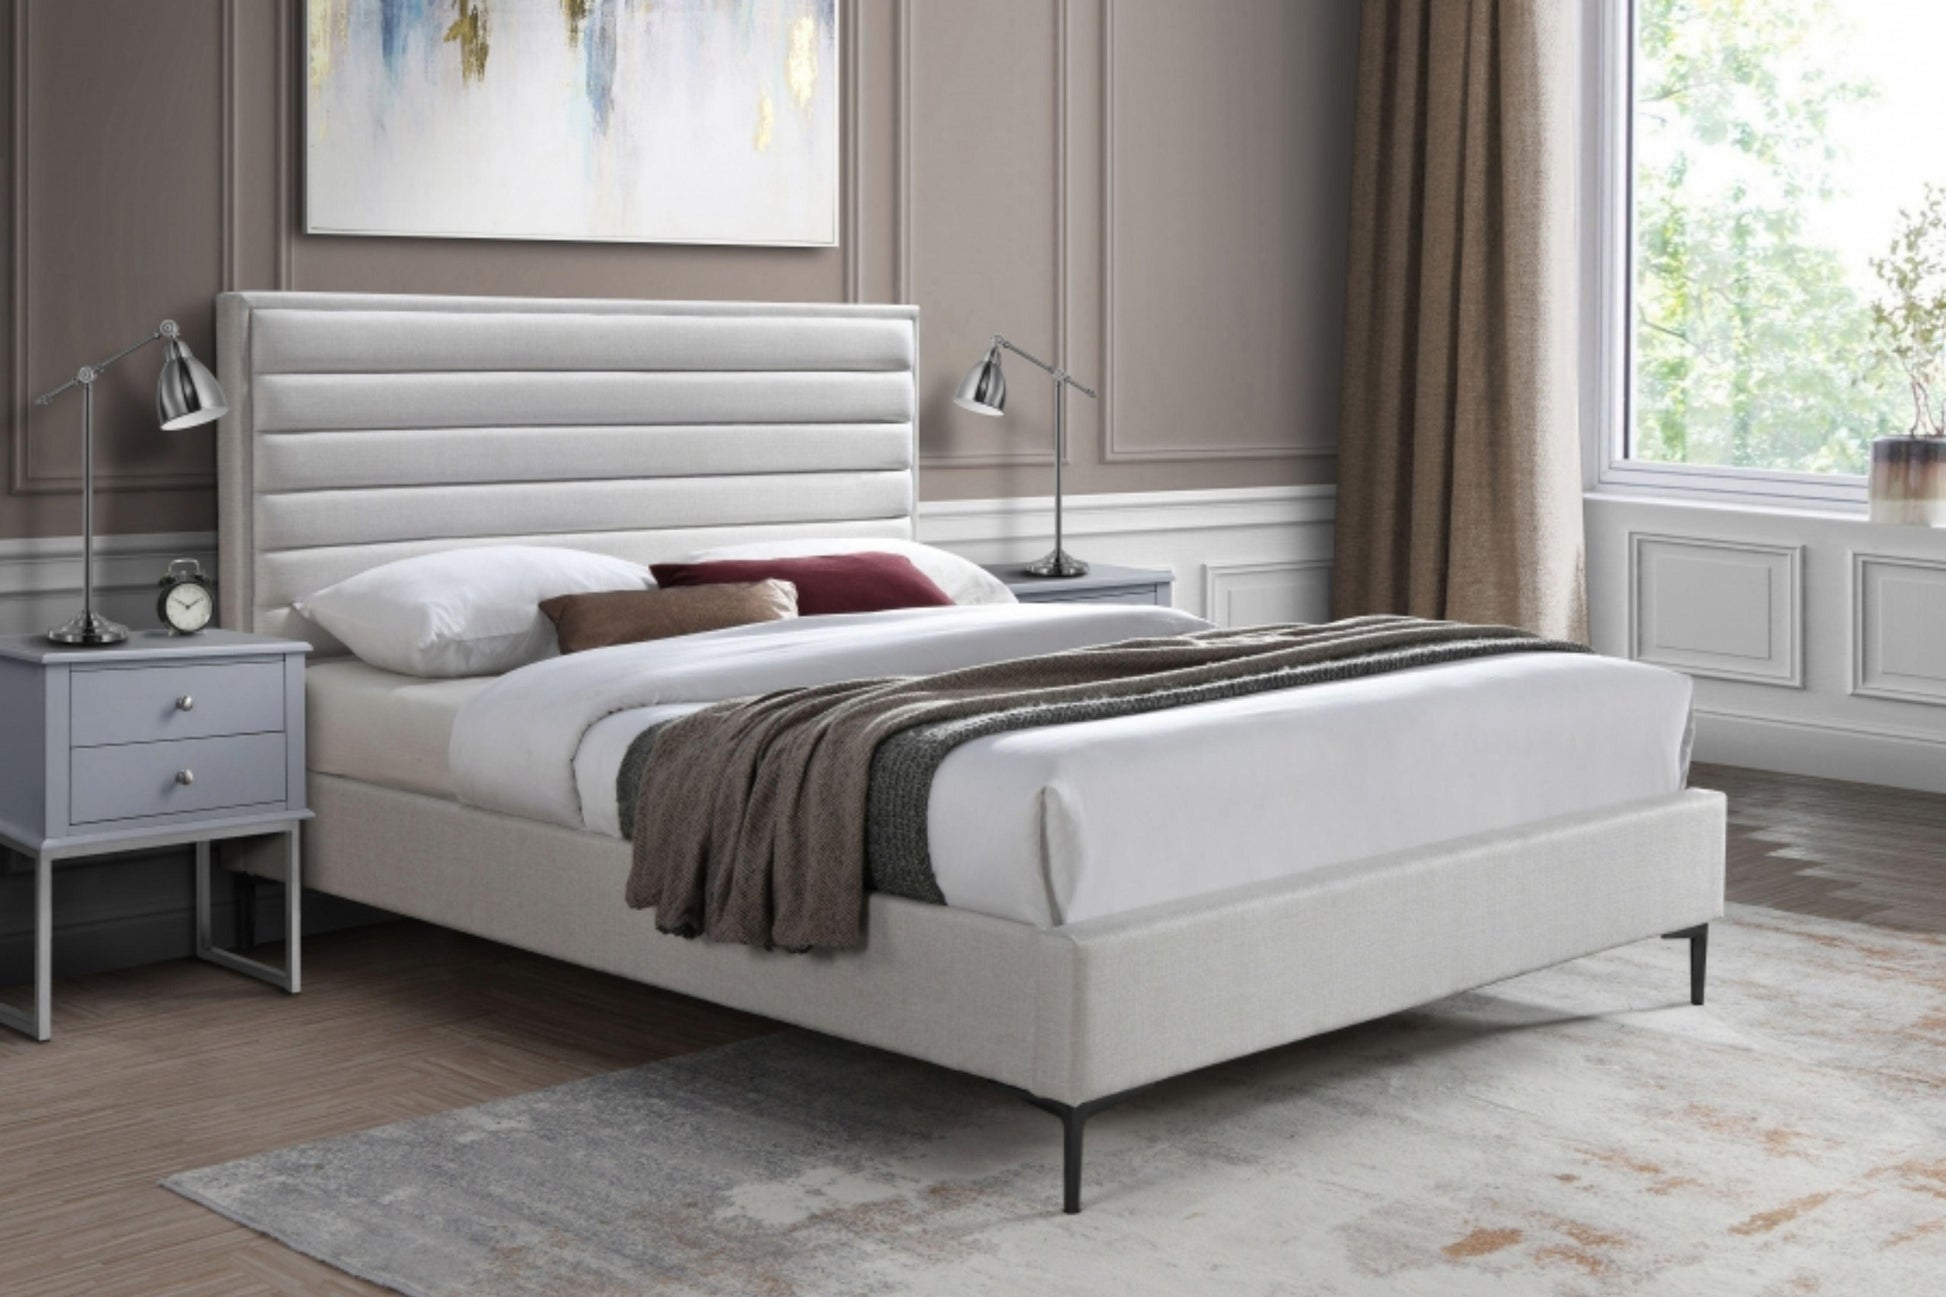 comfortable bed made of linen